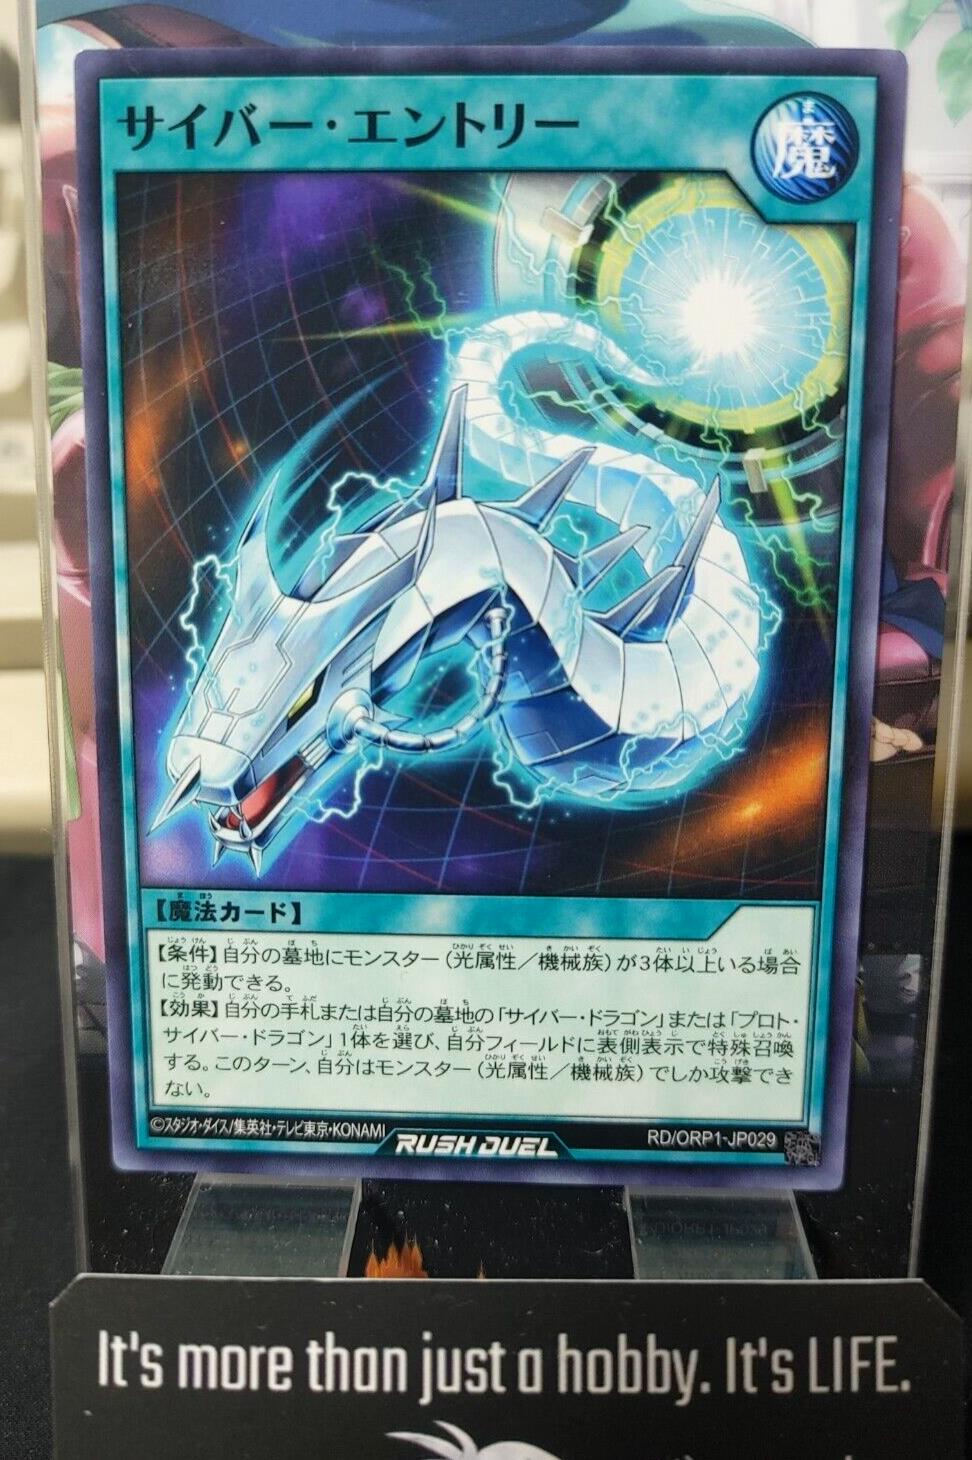 Yugioh RD/ORP1-JP029 Cyber Entry Rush Duel JAPAN